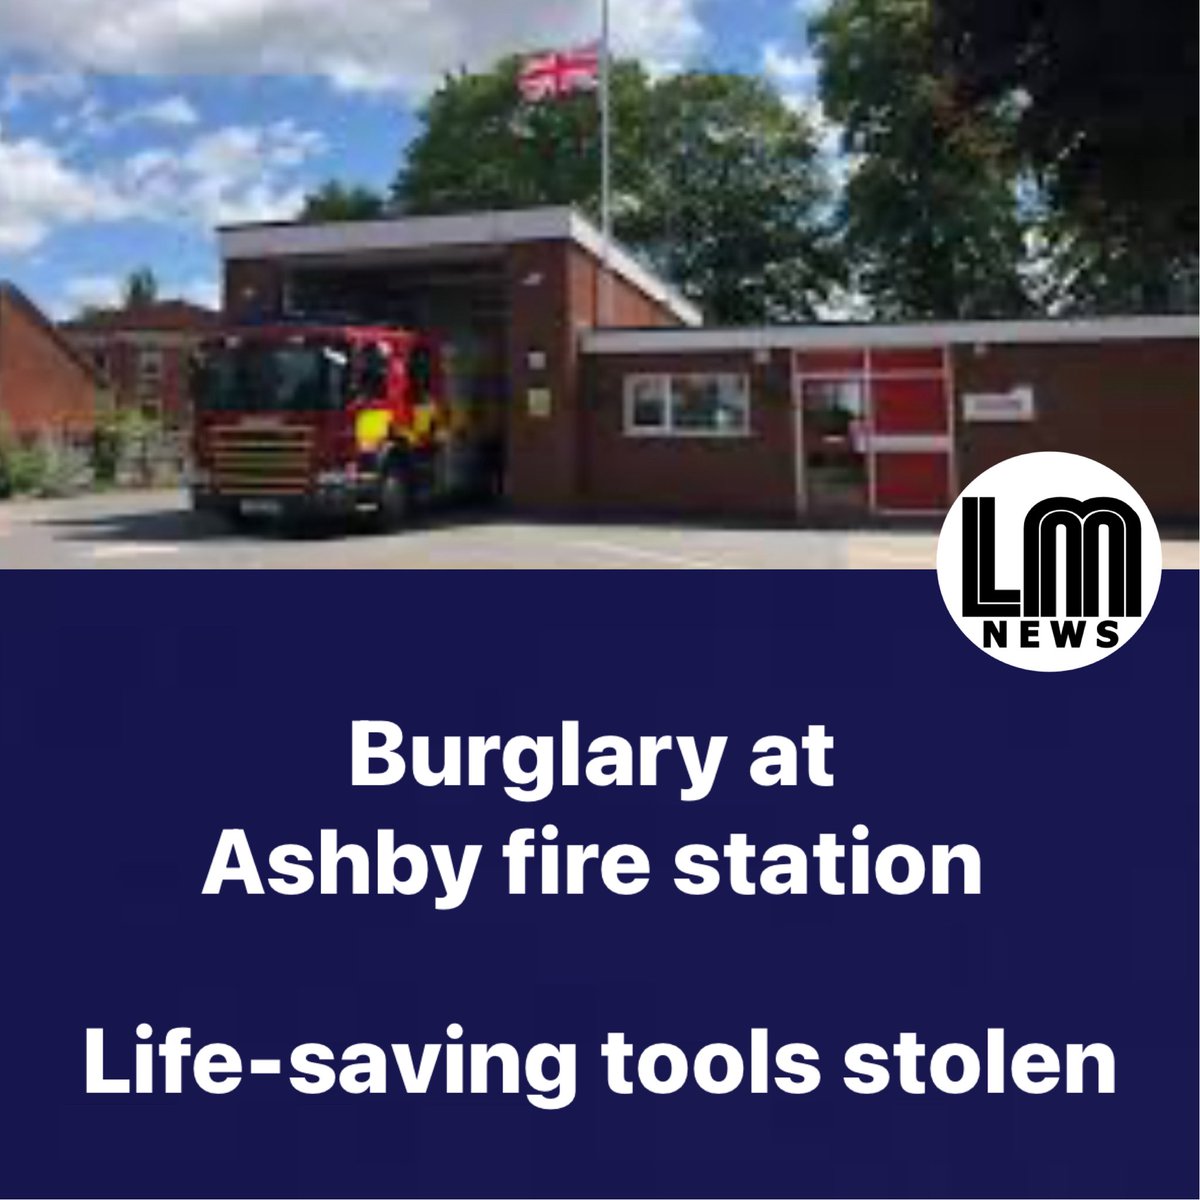 Police are appealing for information after thieves stole thousands of pounds worth of equipment from Ashby fire station. Shortly after midnight on Thursday 21 September, Leicestershire Fire and Rescue Service (LFRS) station based in Wilfred Place, Ashby-De-La-Zouch was broken…